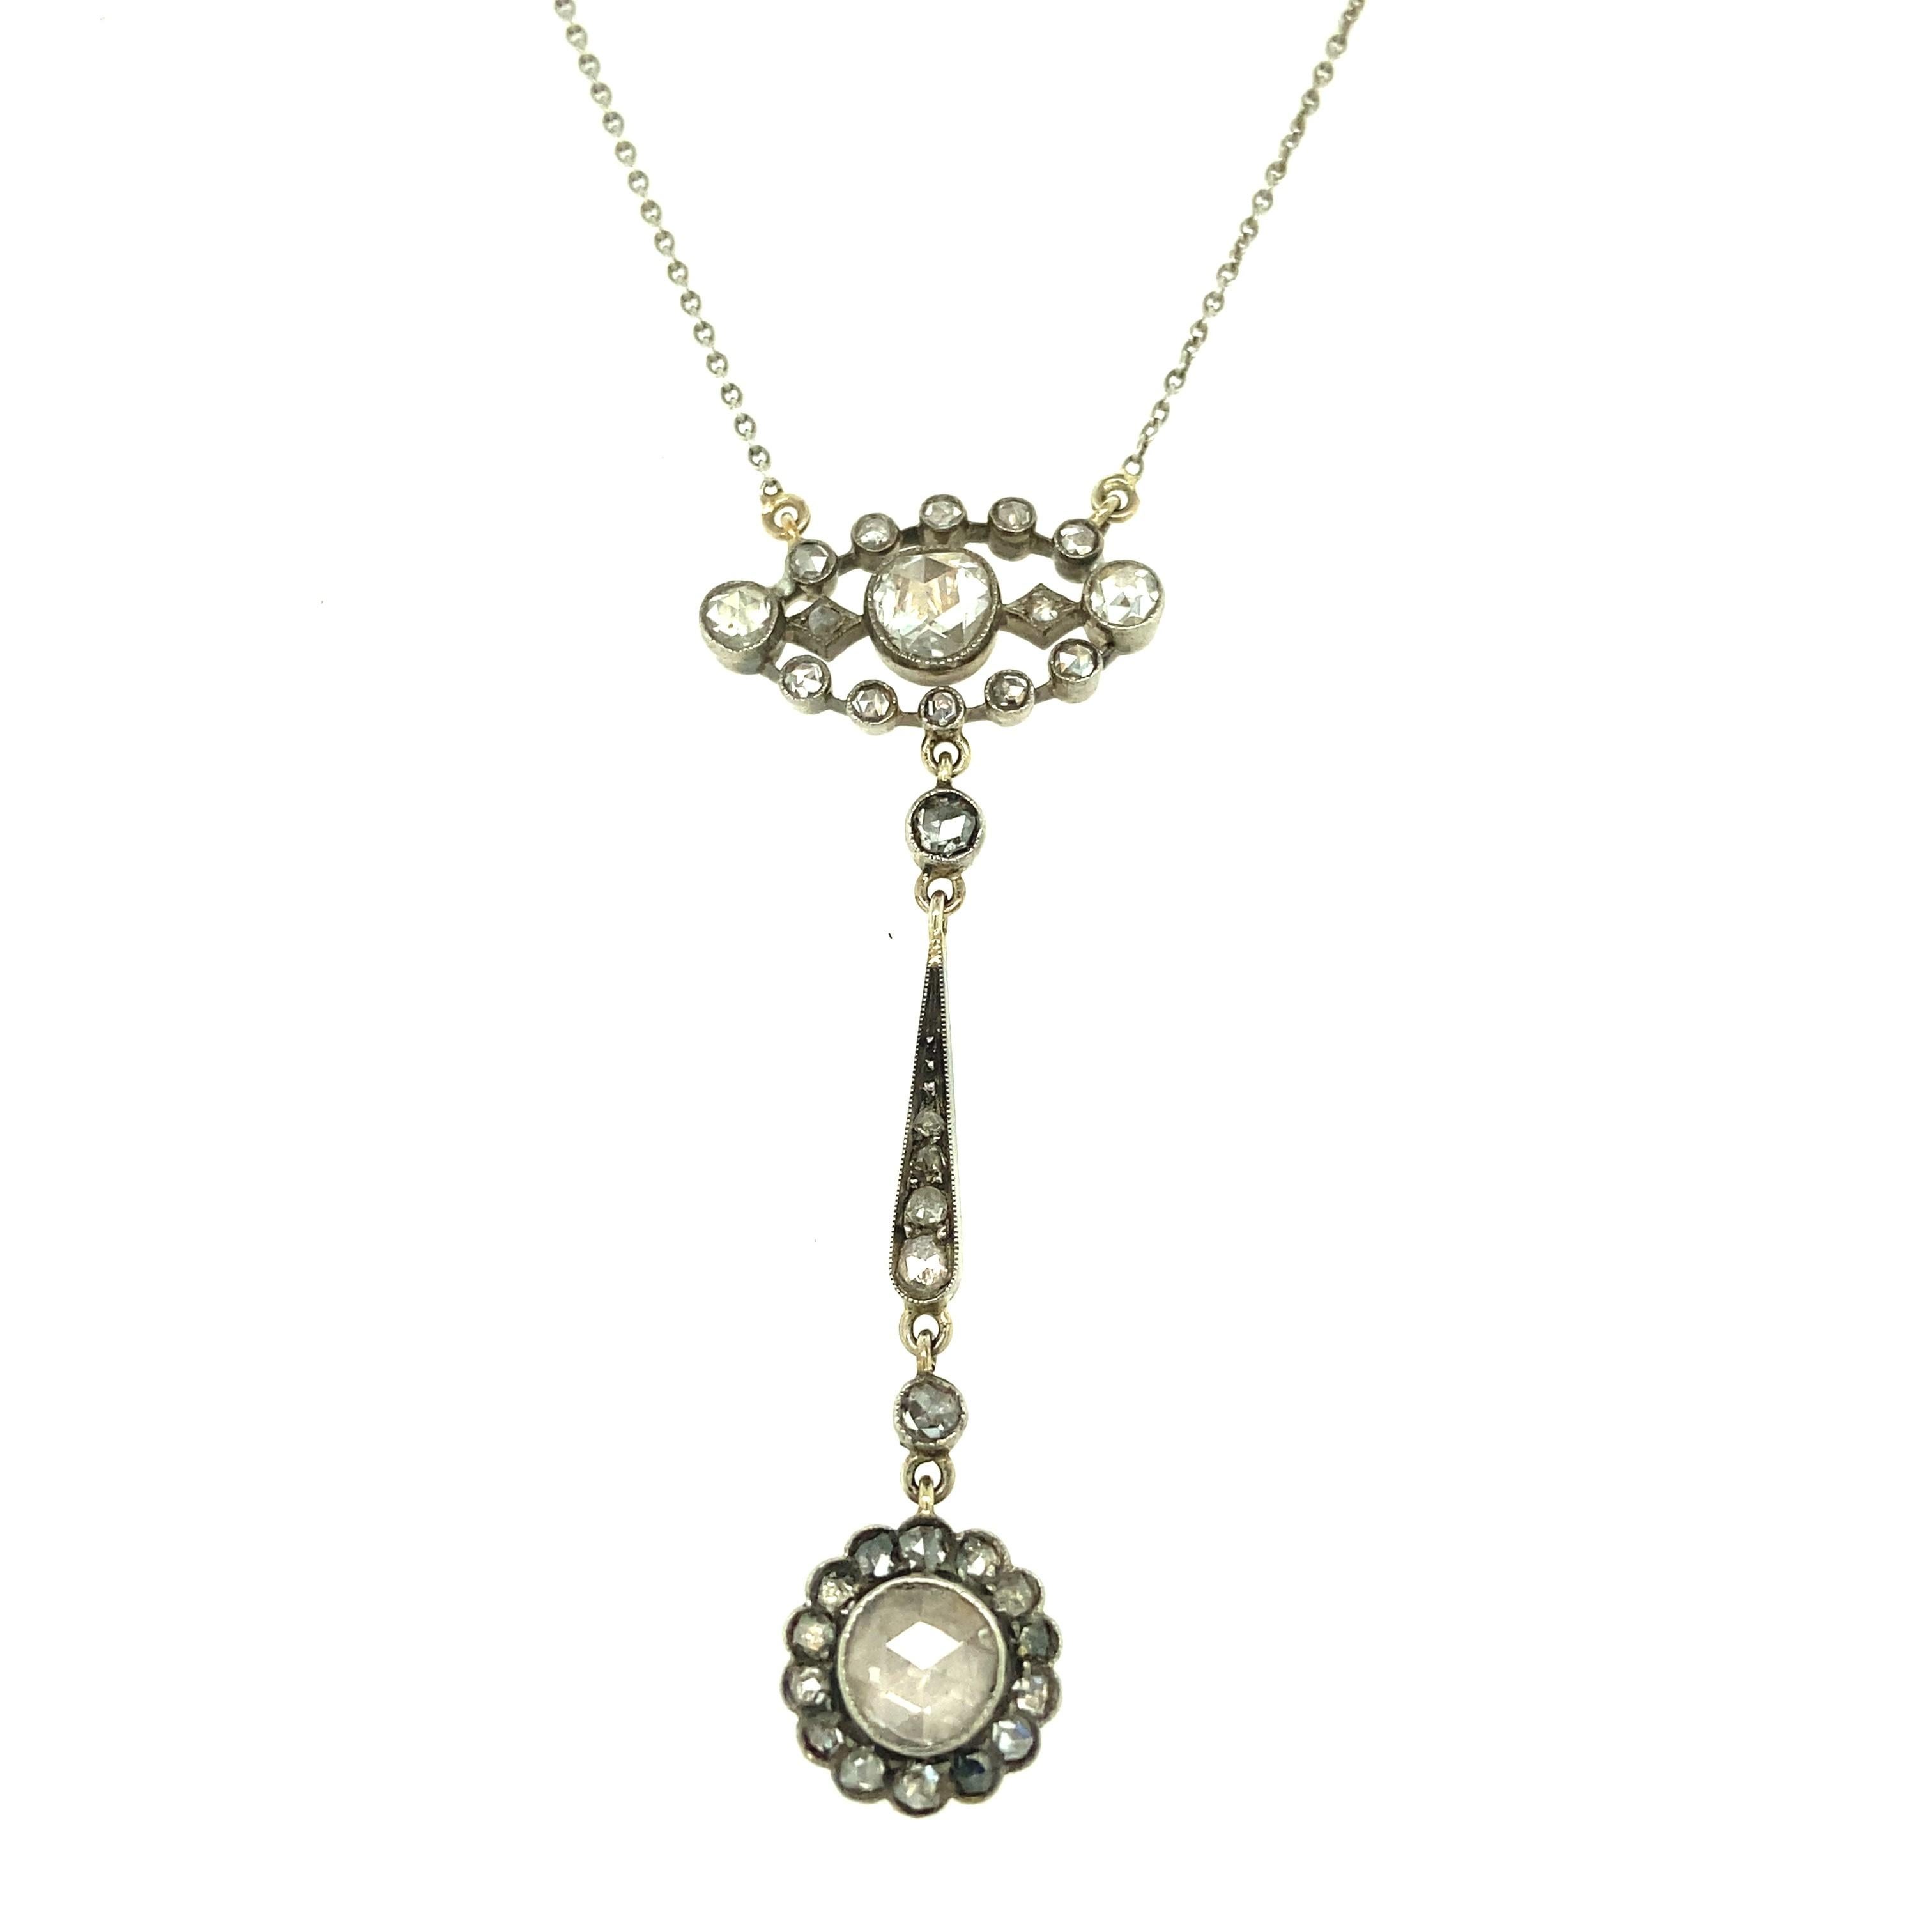 It doesn't get more special than this! This is a completely original Edwardian necklace made with approximately 1.00 carats of foiled rose cut diamonds and platinum. Each rose cut is completely different: different shapes, different sizes, different